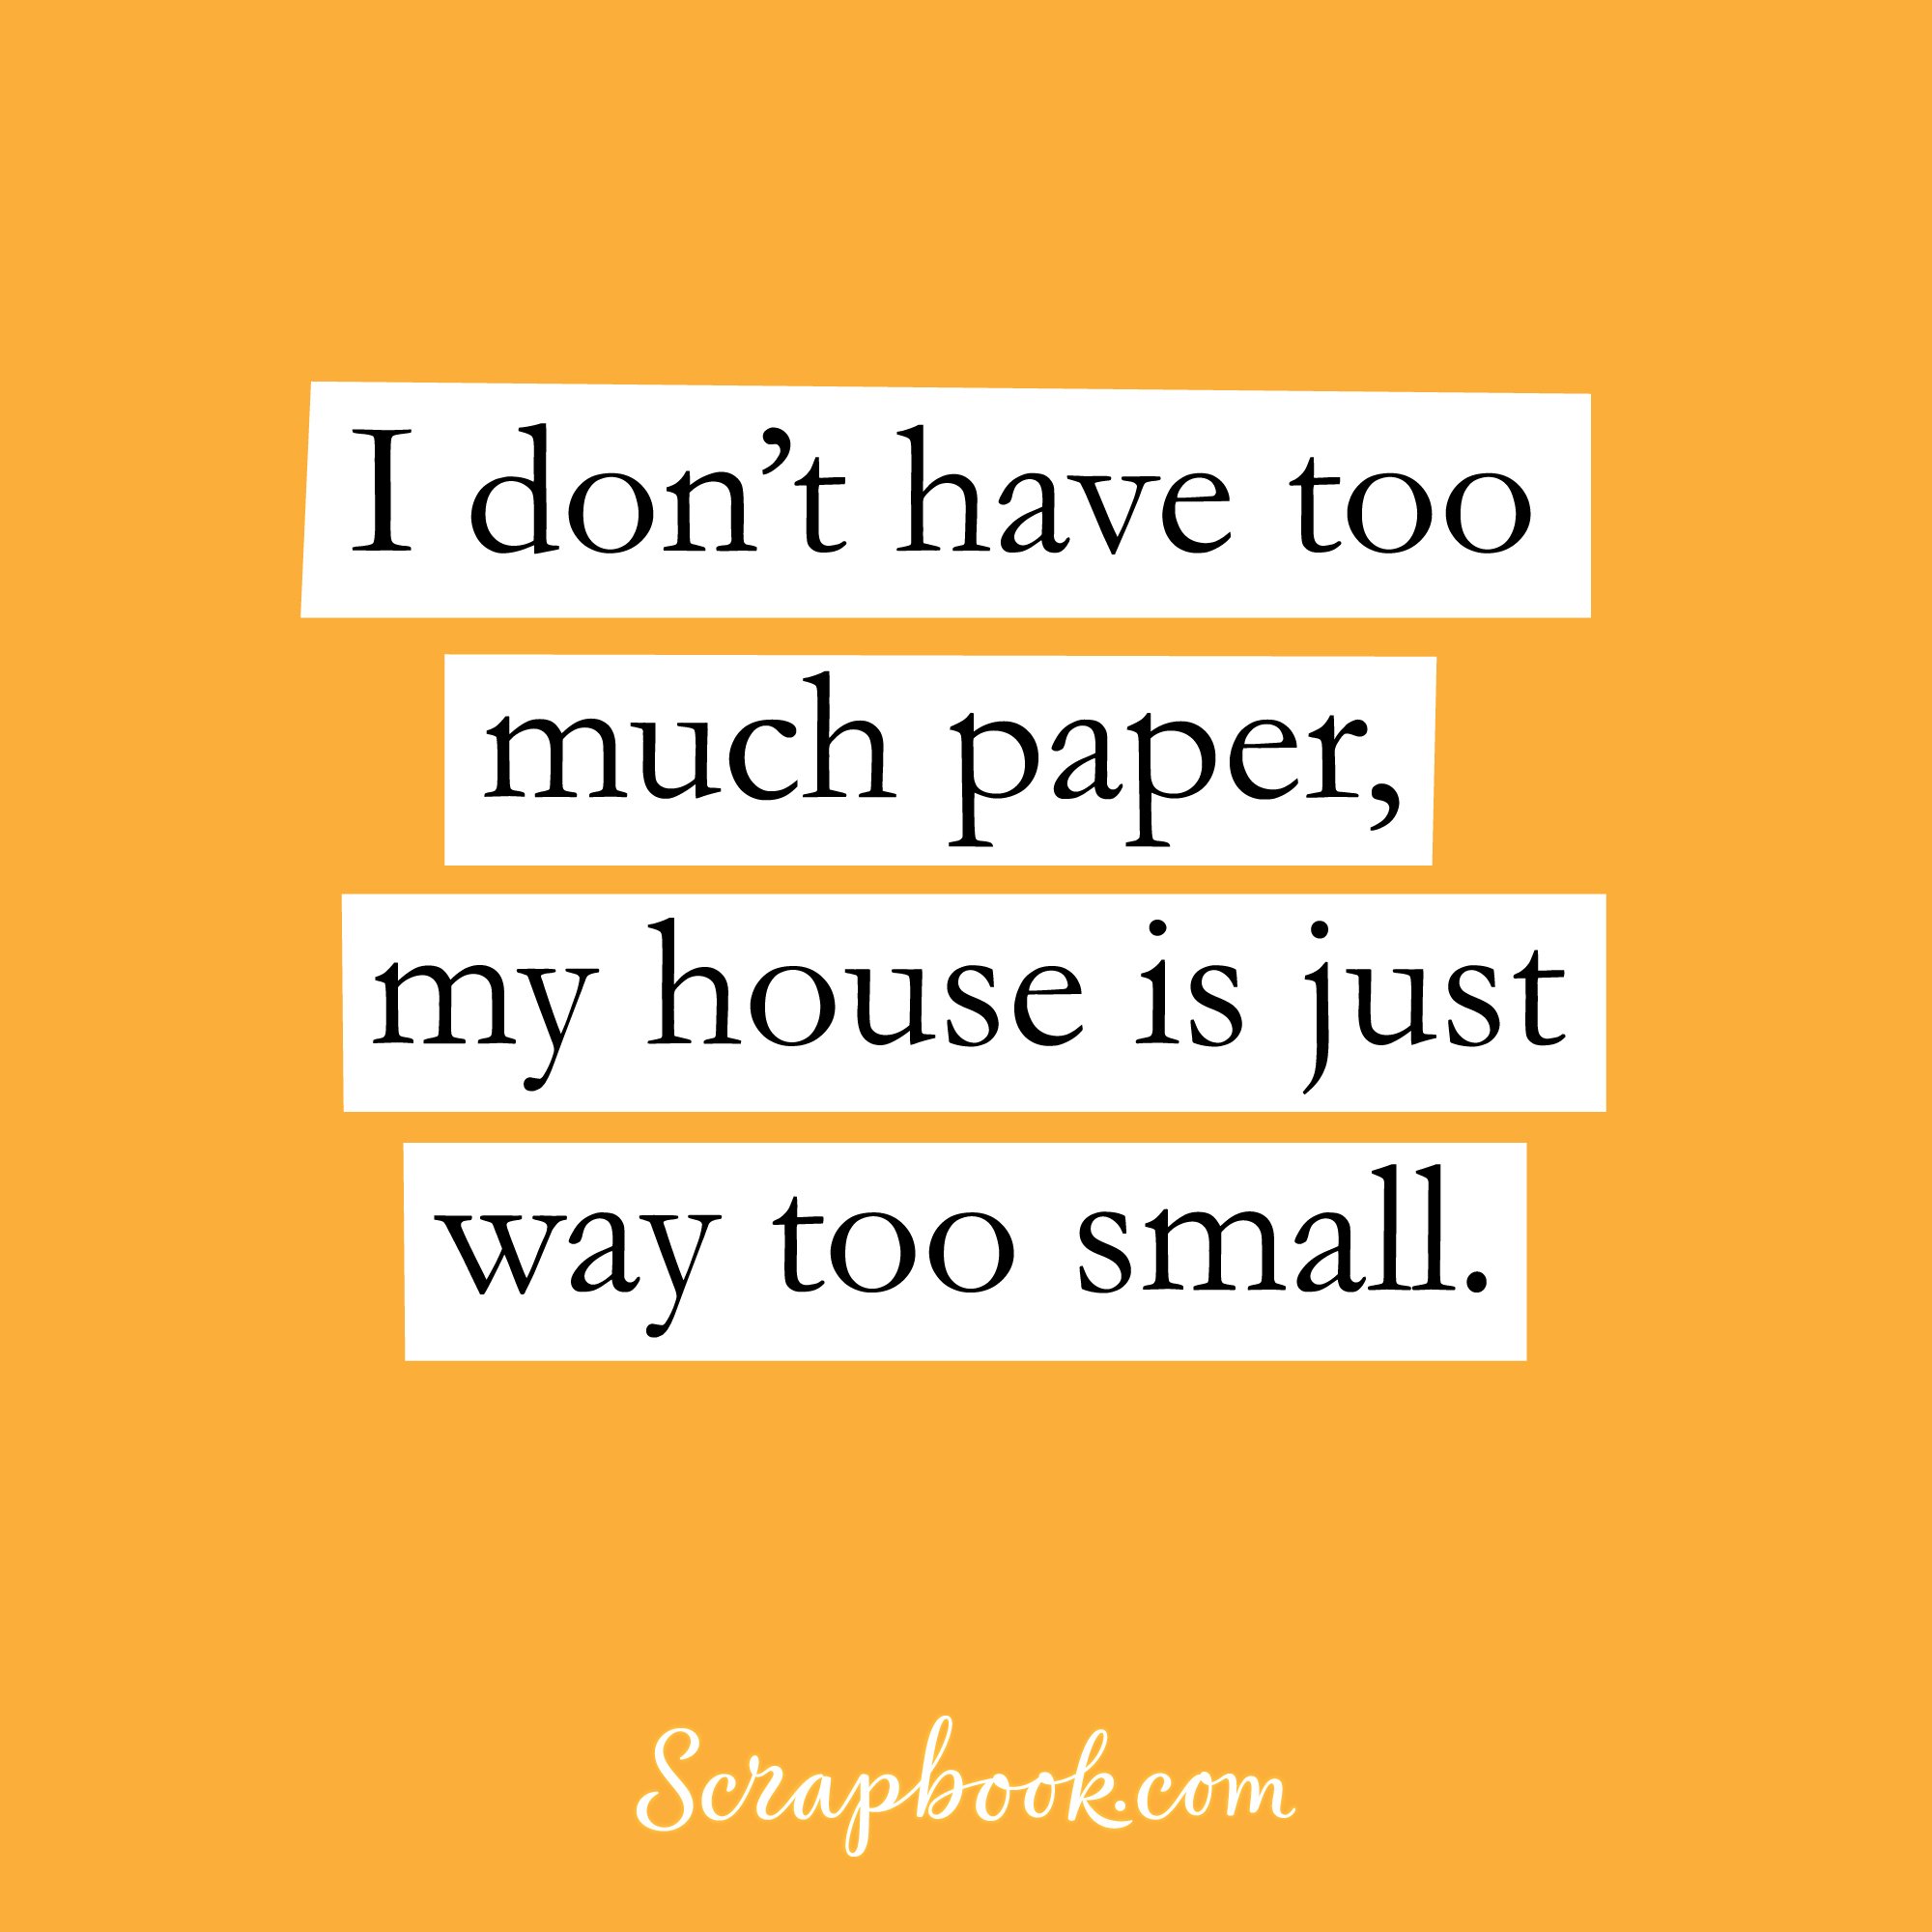 I don't have too much paper, my house is just too small.